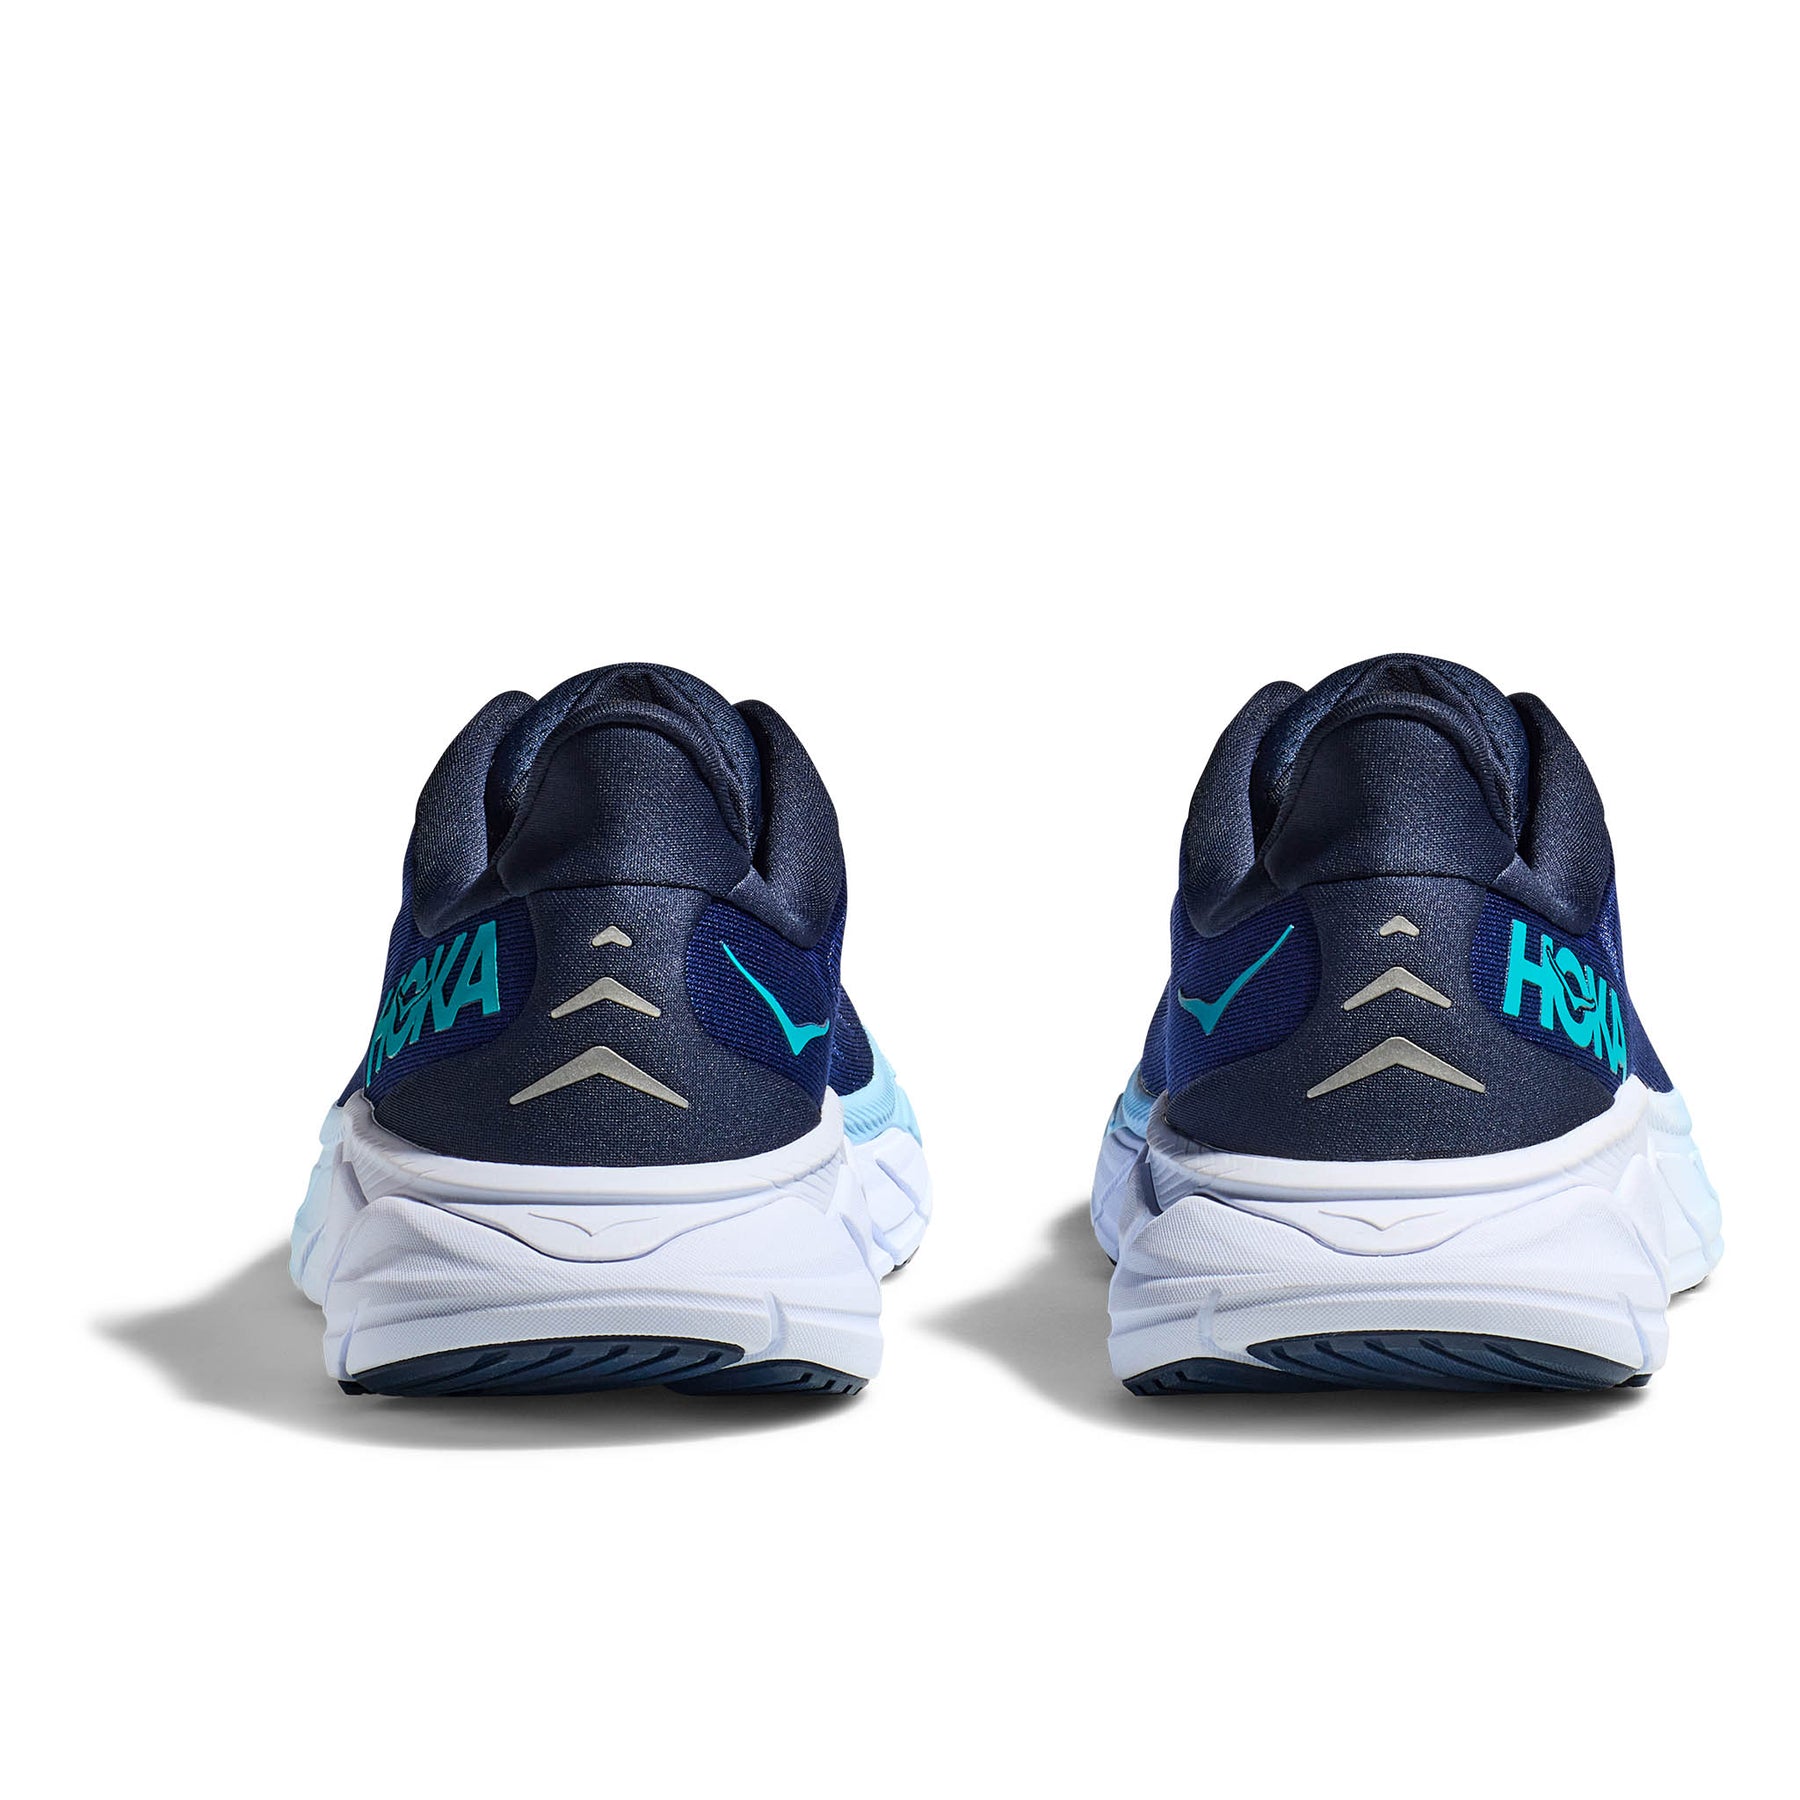 Hoka Arahi 6 Mens Running Shoes: Outer Space/Bellwether Blue